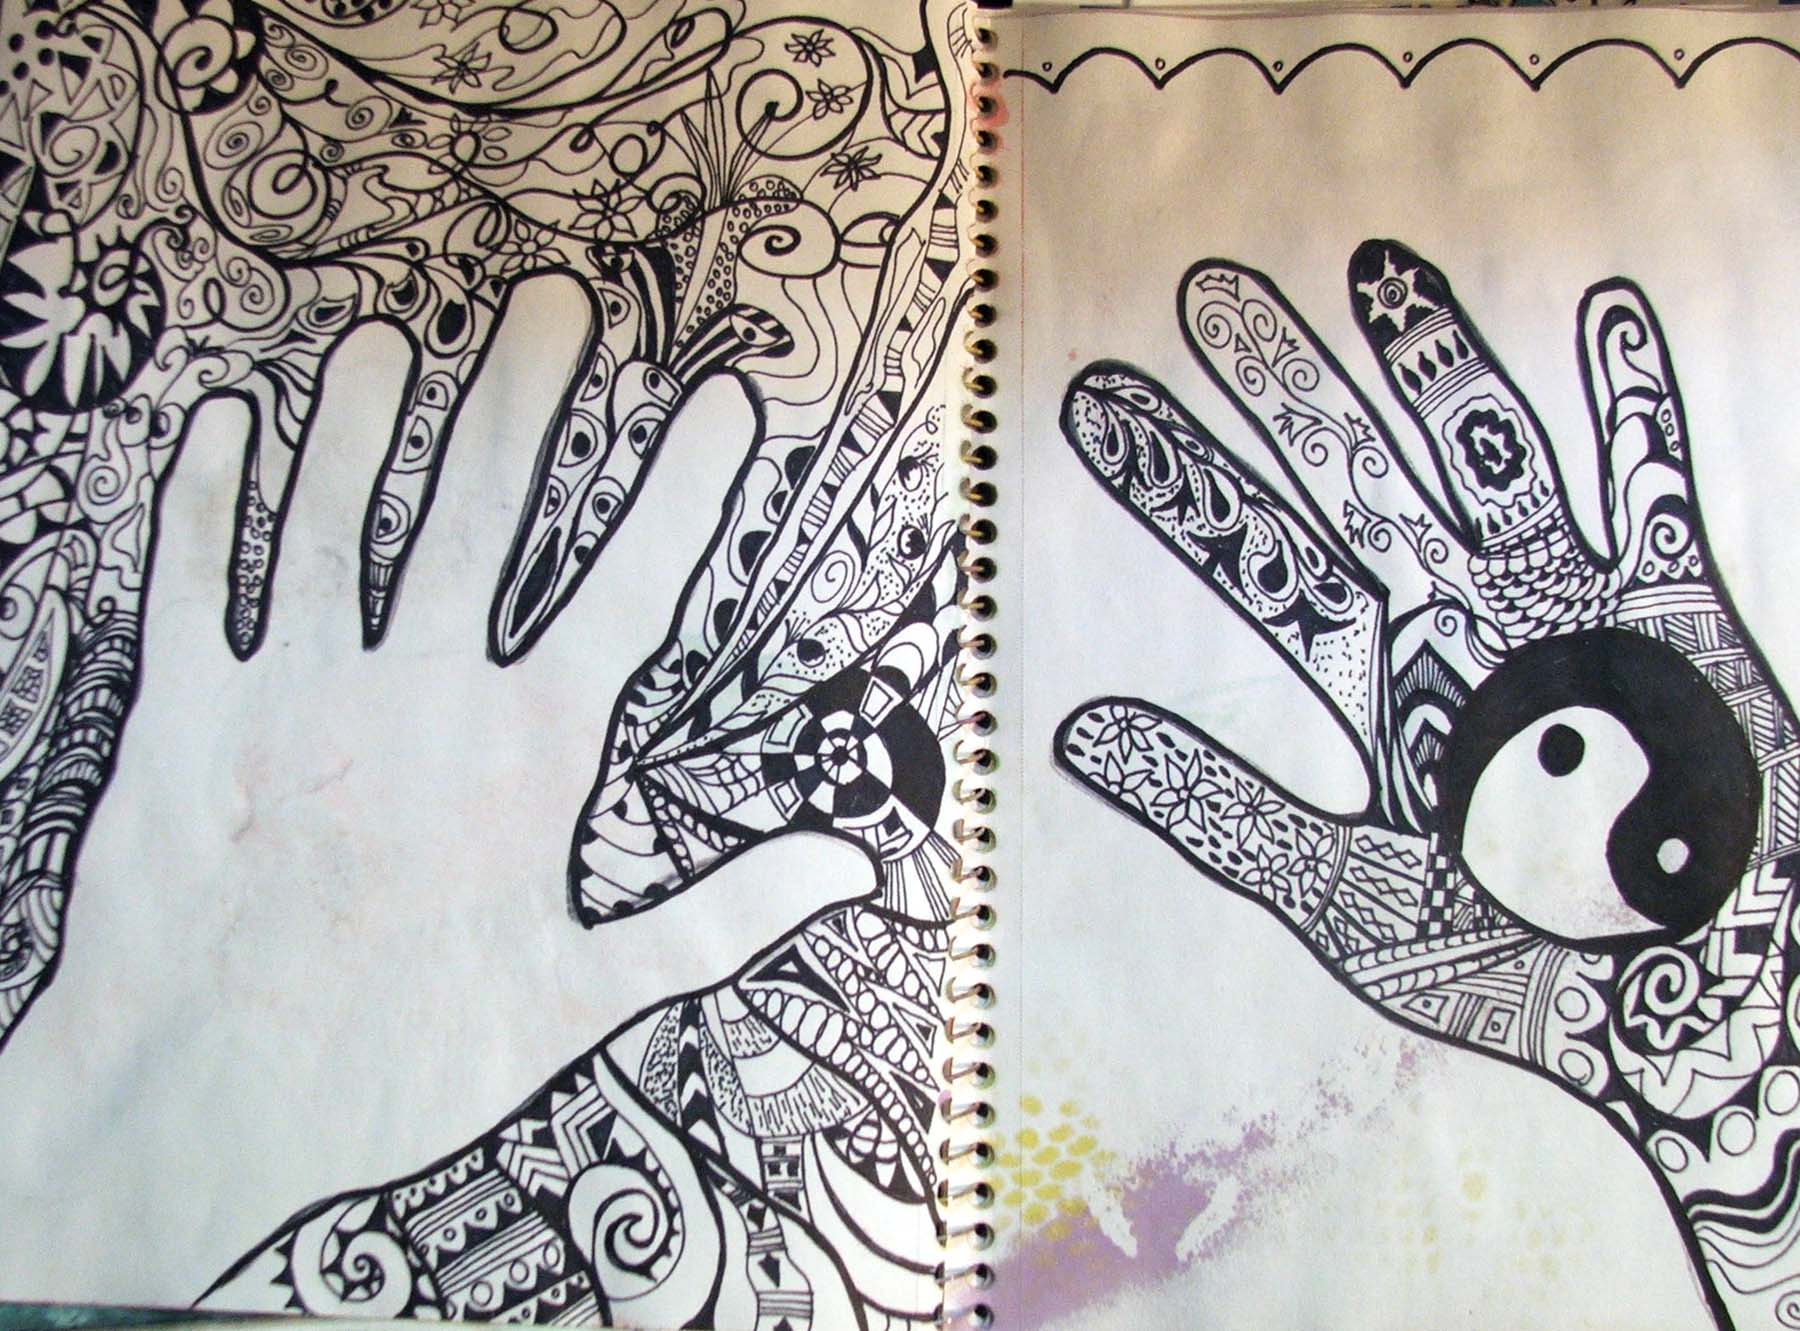 hands zentangled - one inside the hand, one outside the hand: balance